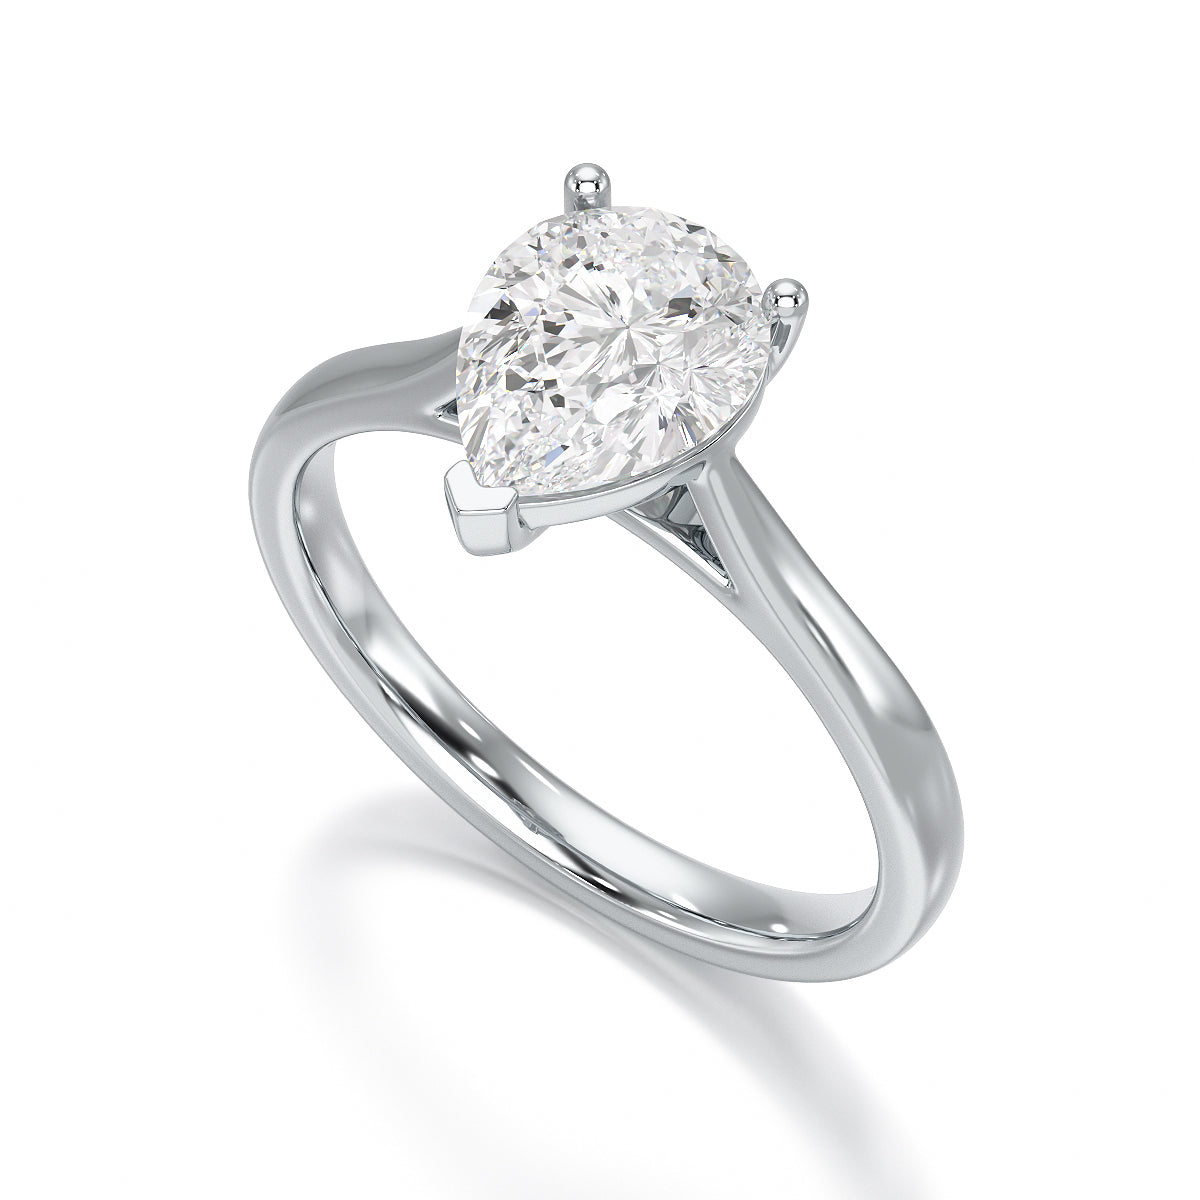 Diamond Engagement Ring- Pear Shaped Solitaire With Tapered Shoulders